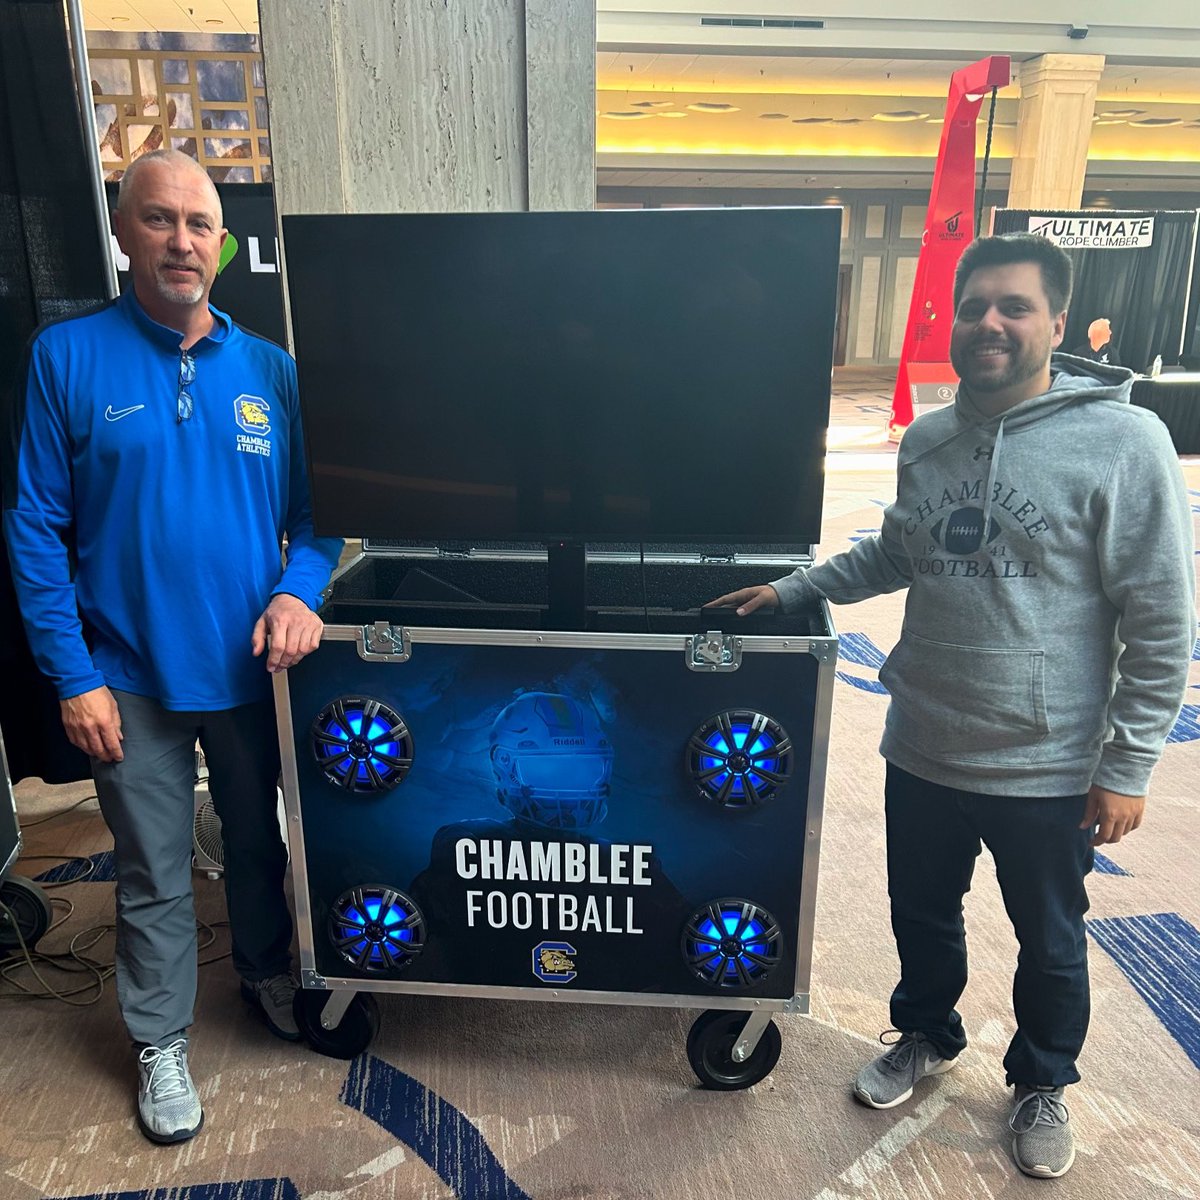 Chamblee football 🏈‼️ What's a bigger flex for your team than having a Huddlbox?! 💪 🔊🔥 Let's chat and get you hooked up: 📞 251-281-0010 📧 sales@huddlbox.com huddlbox.com #sports #chambleefootball #esports #sportsphotography #sportster #like #football